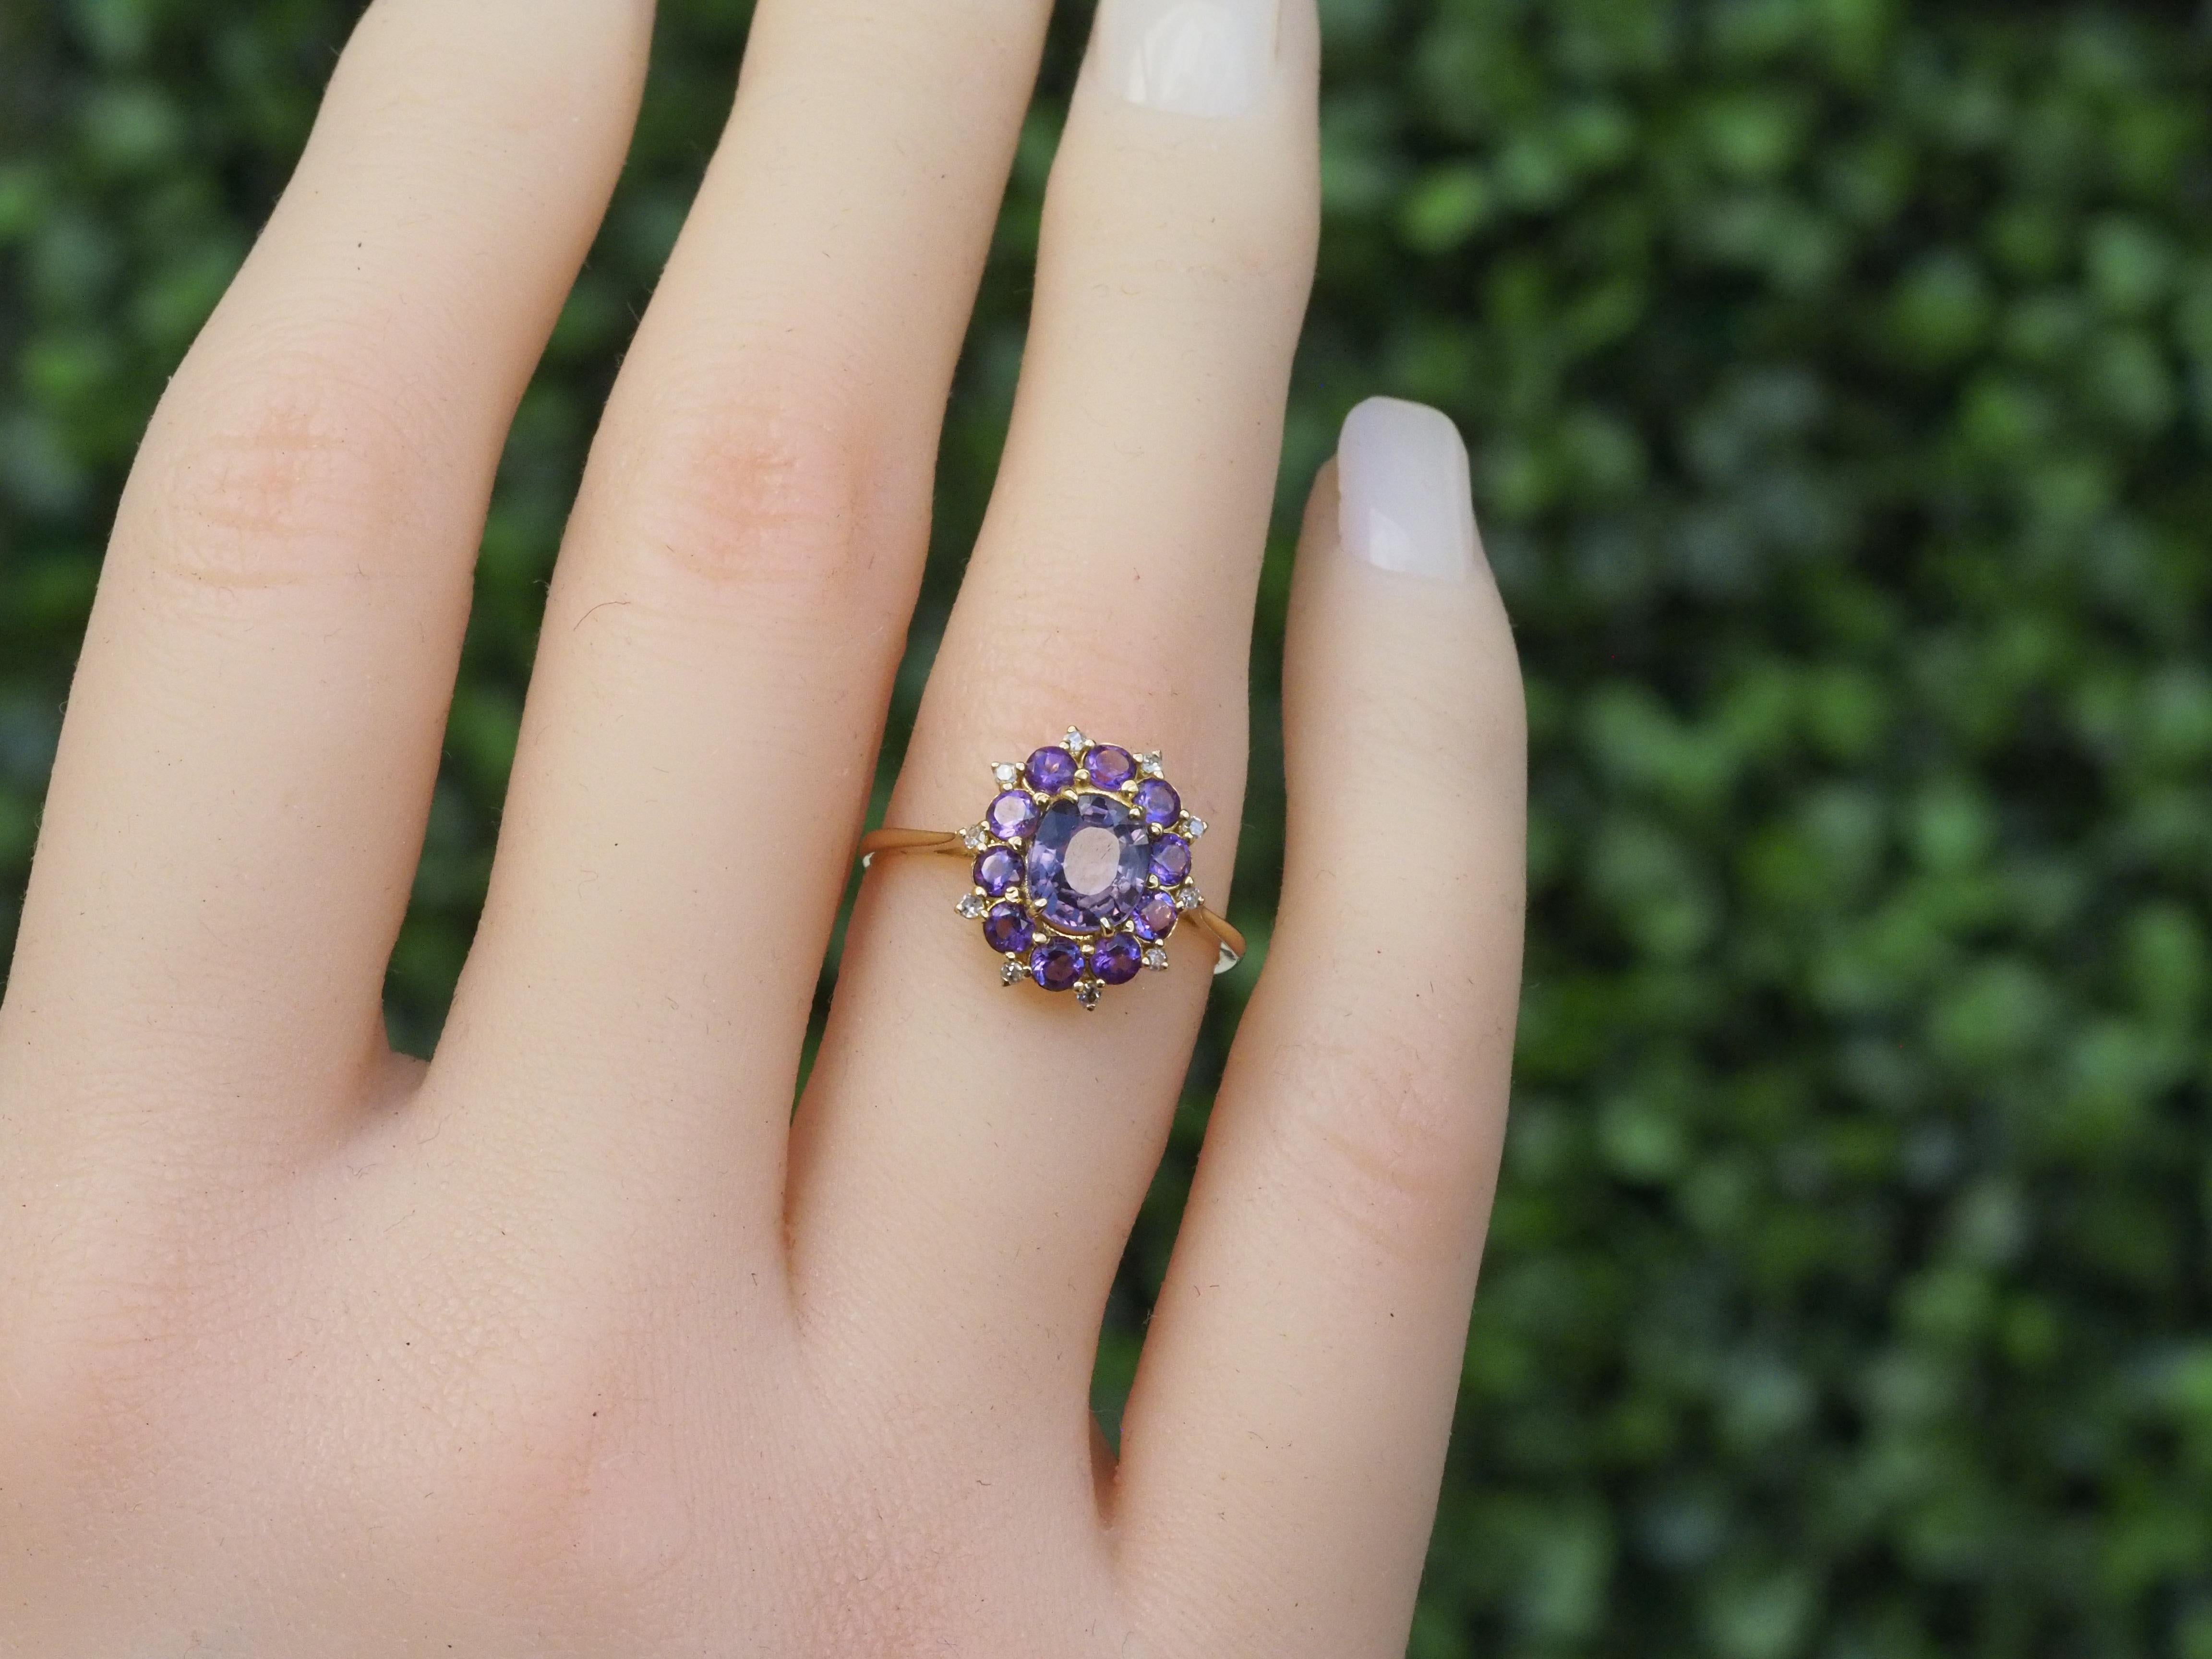 Lavender Spinel Gold Ring, 14k Gold Ring with Spinel, Amethyst and Diamonds 3